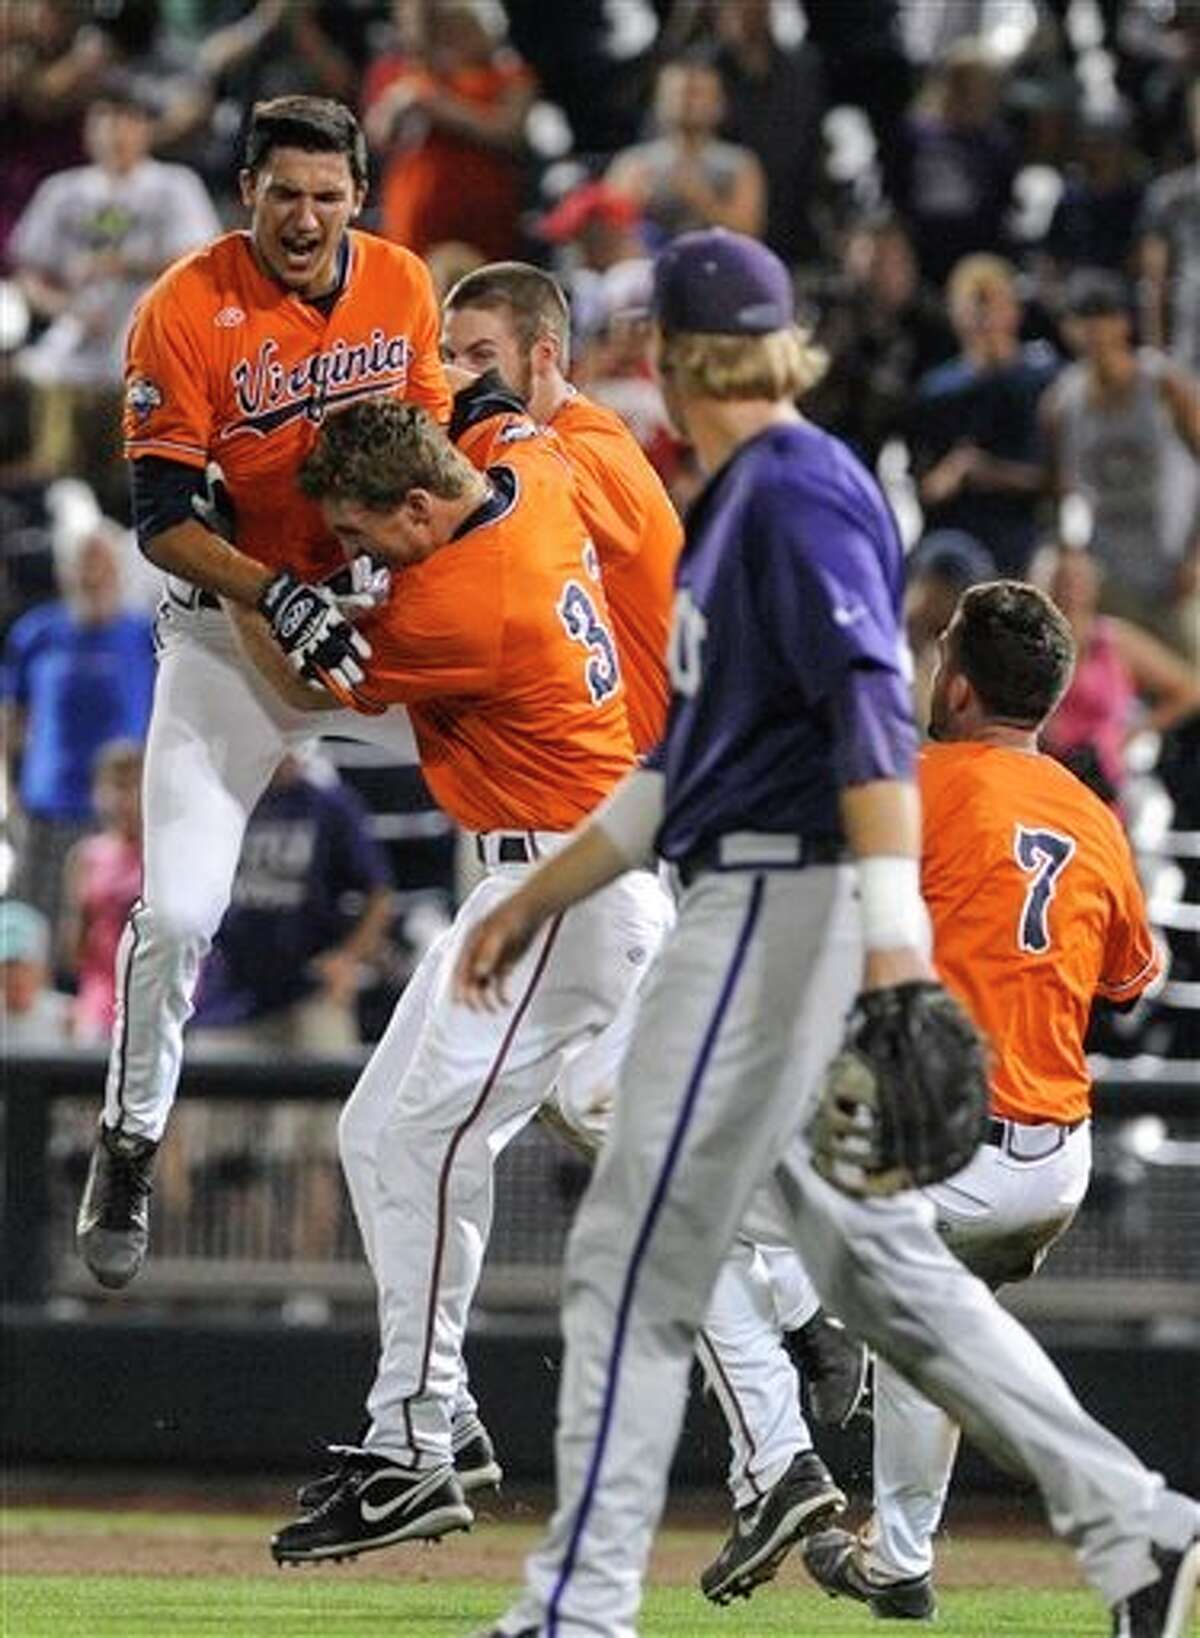 Virginia shortstop Daniel Pinero, left, celebrates with Thomas Woodruff (37) and others after winning 3-2 an NCAA baseball College World Series game against TCU in 15 innings in Omaha, Neb., Wednesday, June 18, 2014. TCU's Kevin Cron is looking on in the foreground. (AP Photo/Eric Francis)